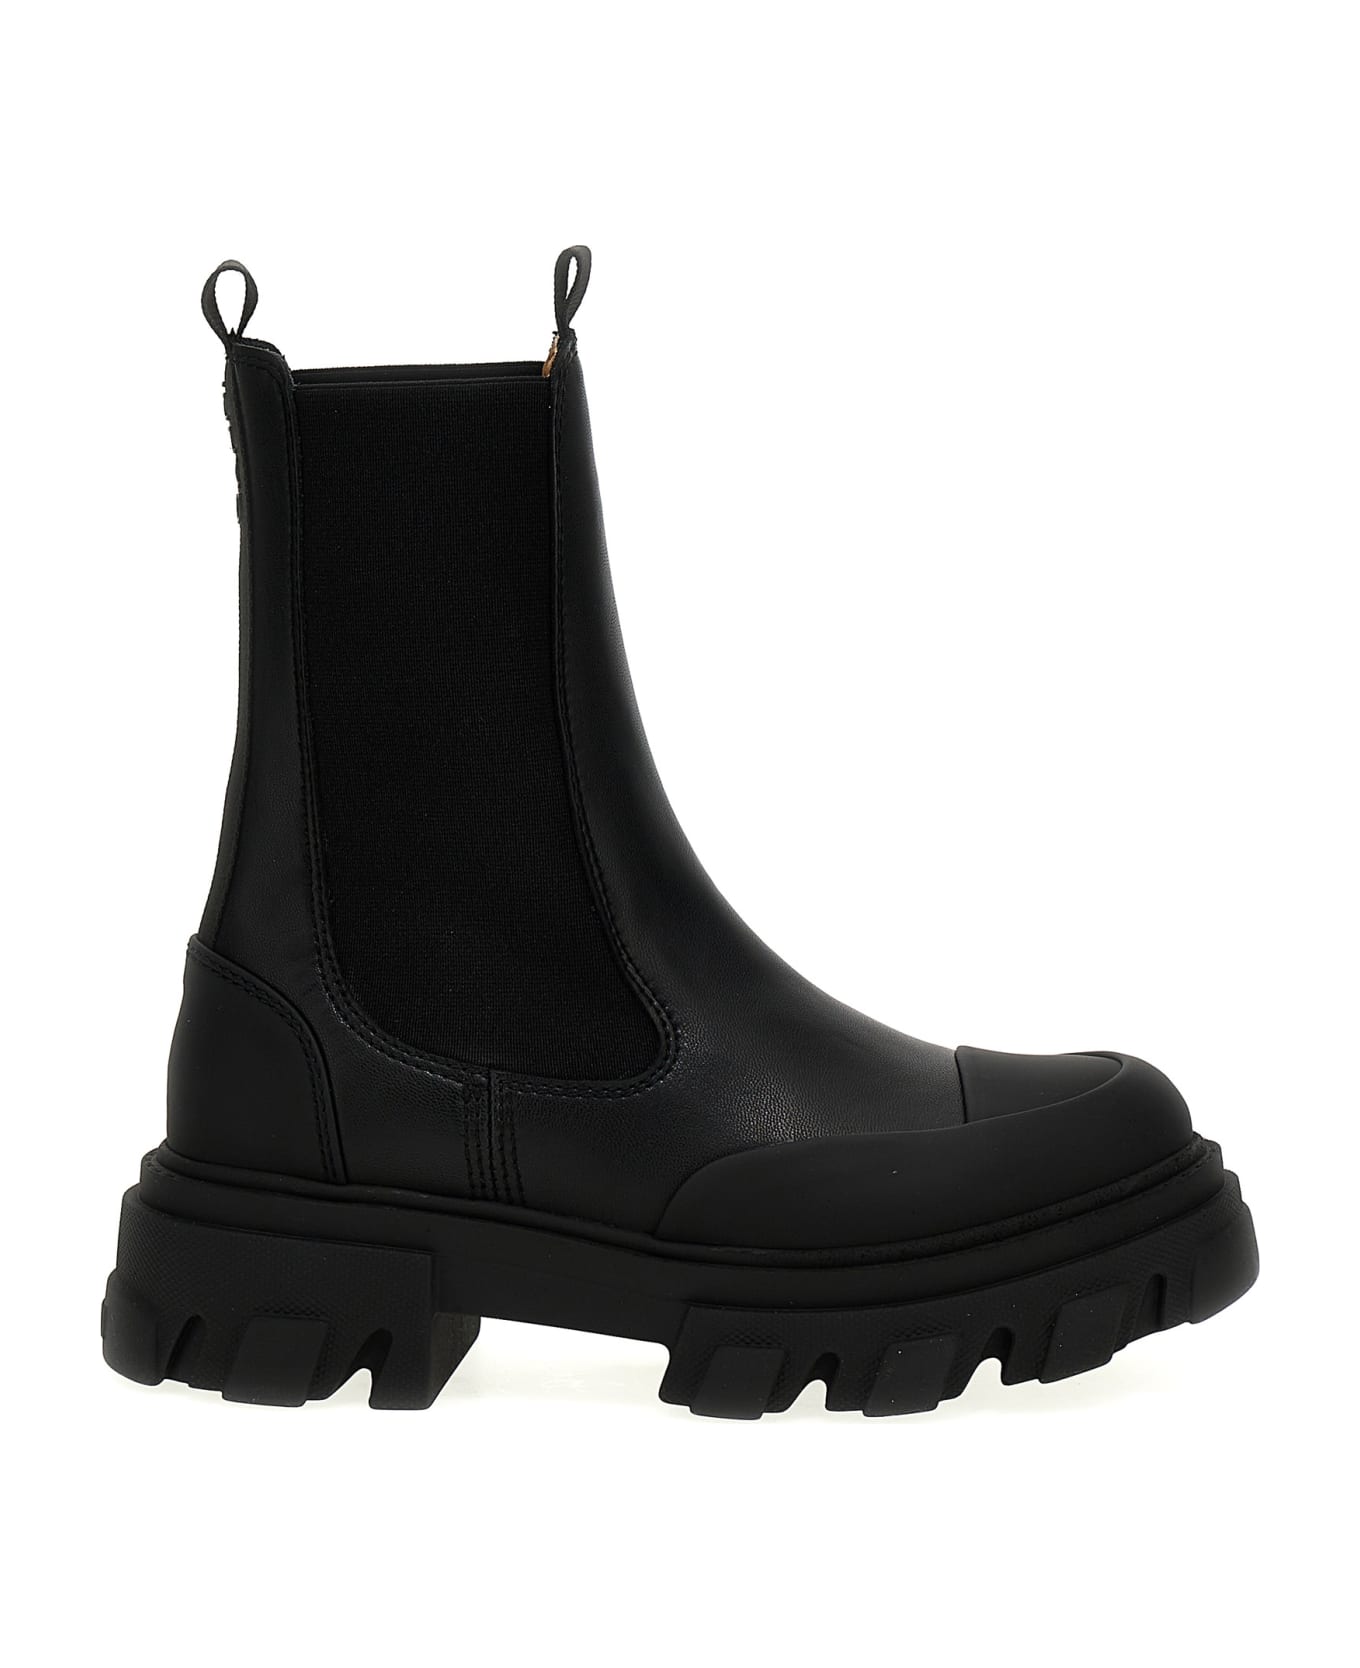 Ganni Leather Ankle Boots - Black   ブーツ